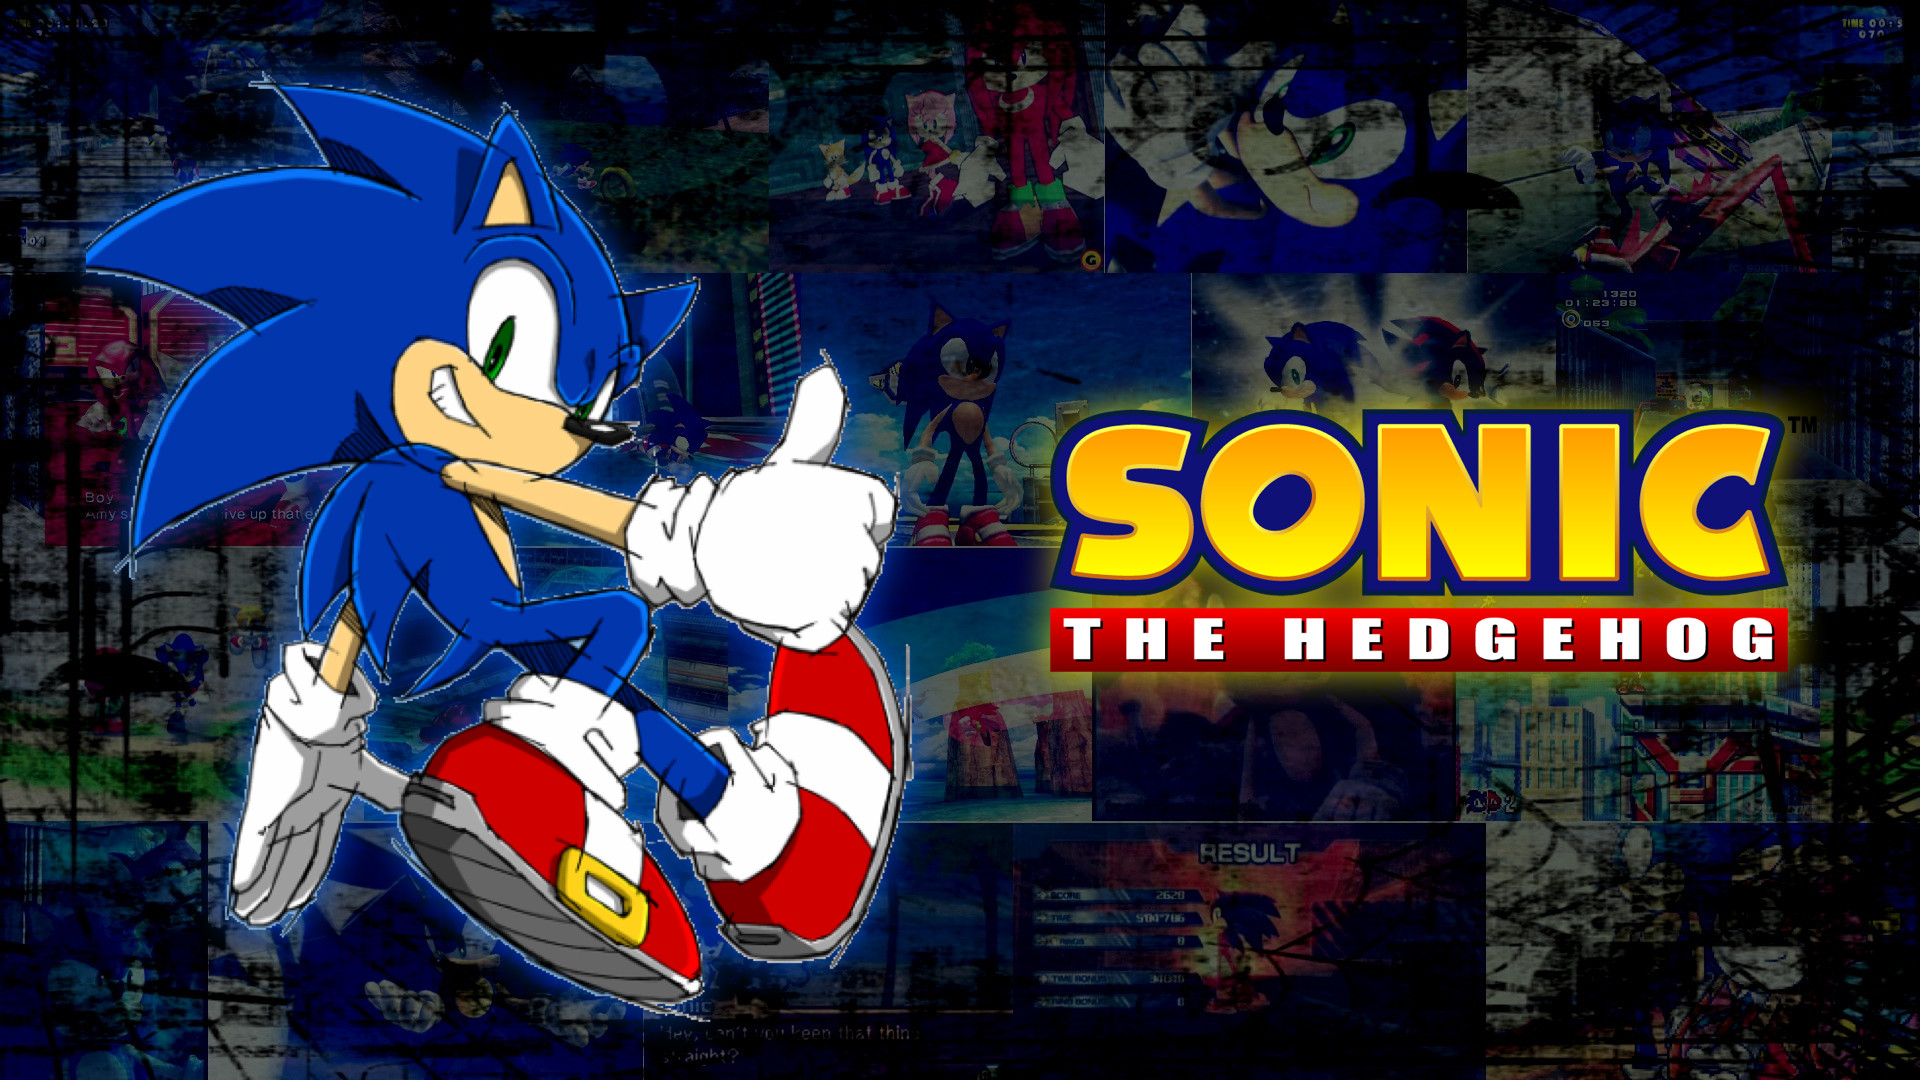 Sonic X Wallpaper 64 Pictures